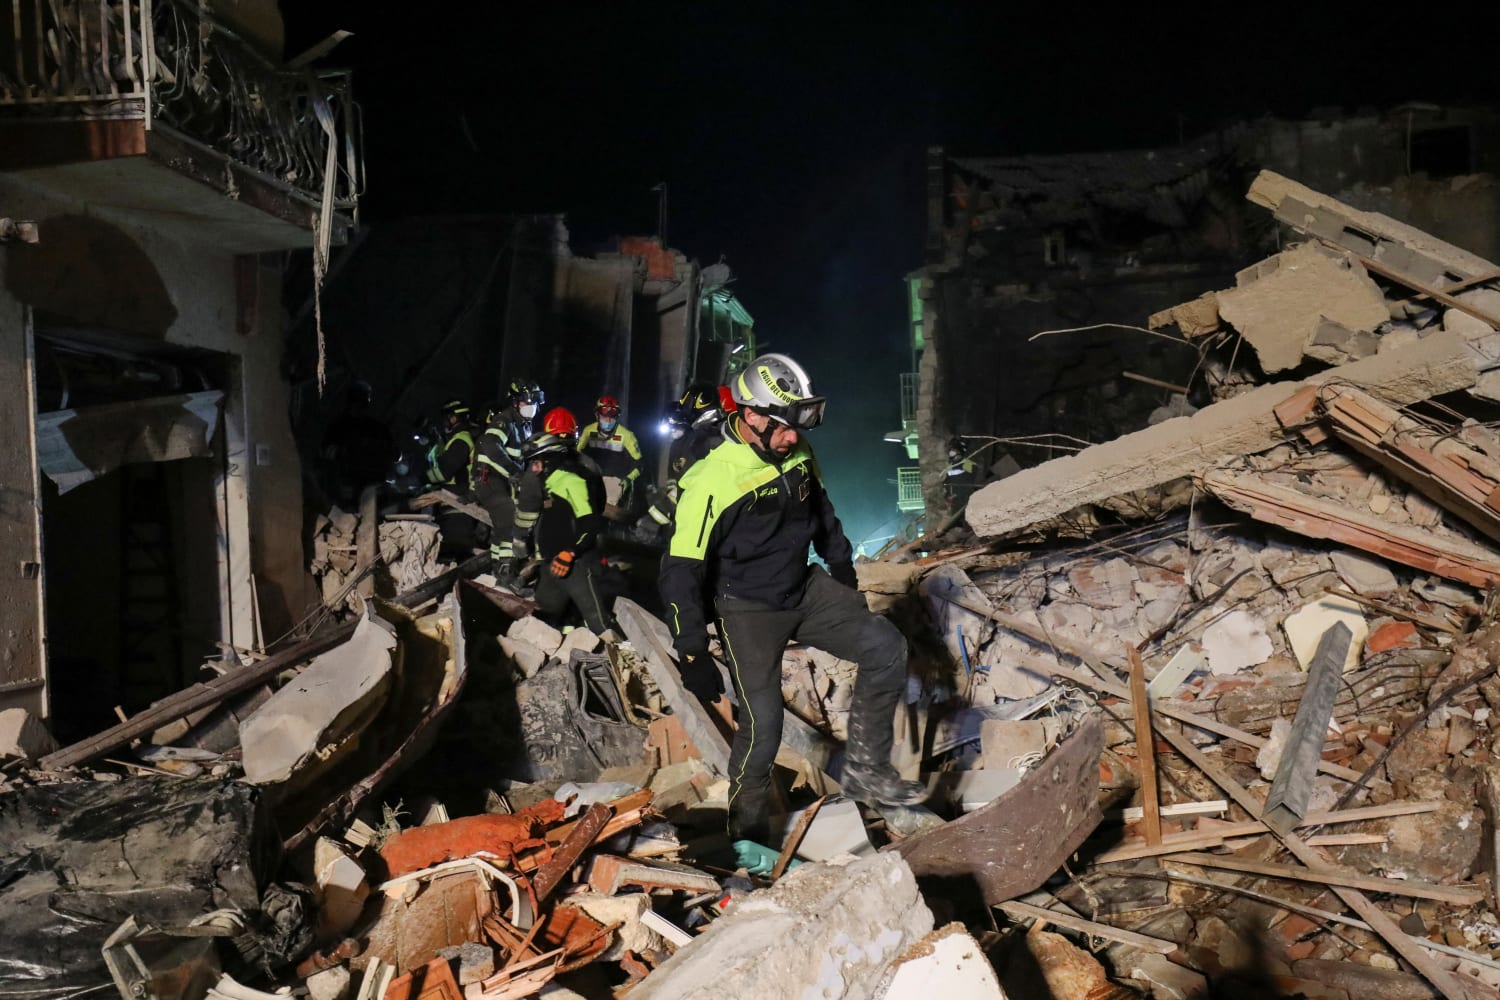 At least three dead in building collapse in Sicily